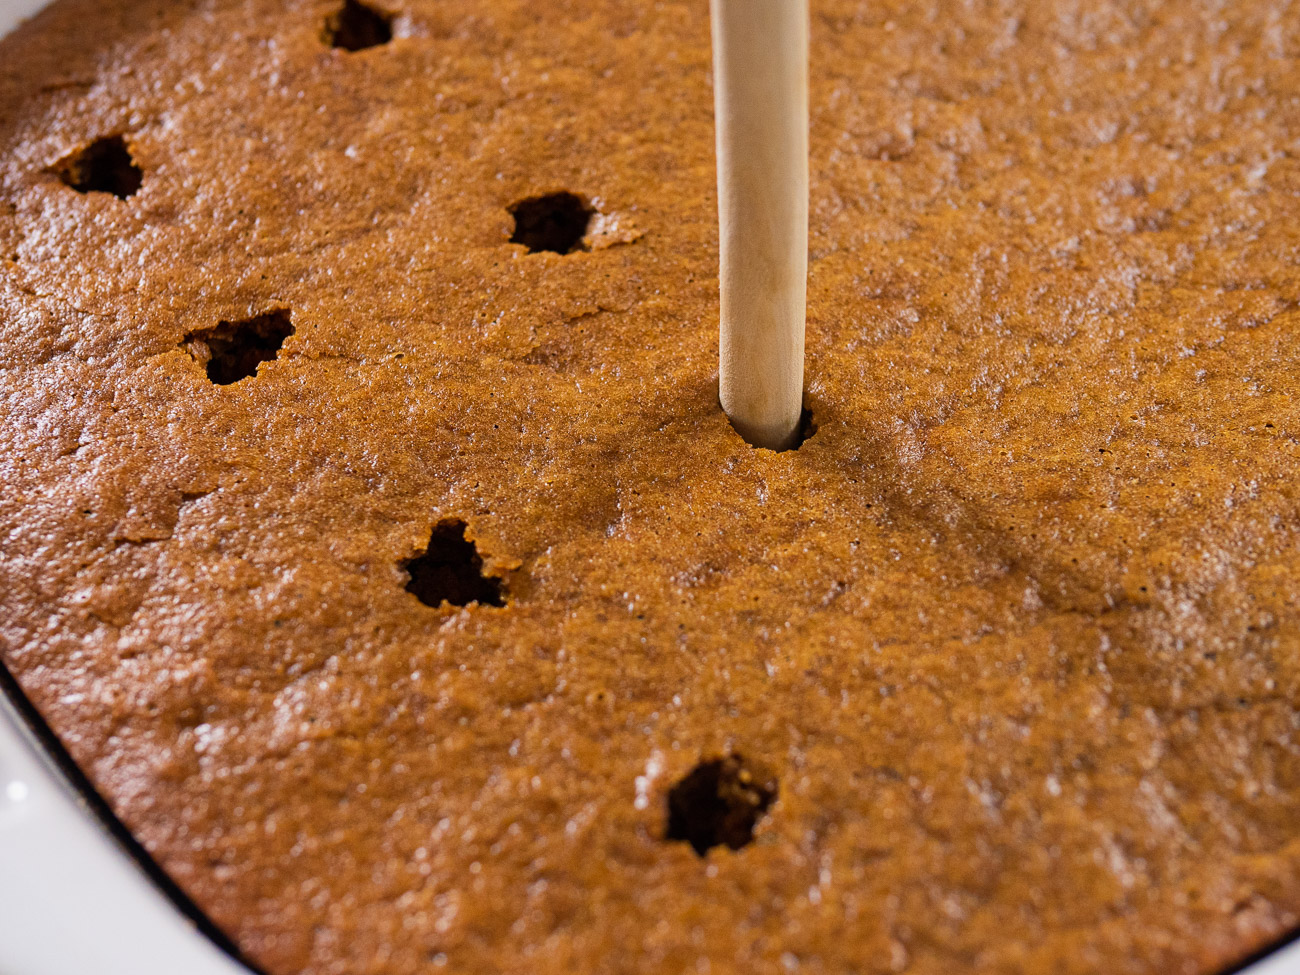 Using a straw or wooden spoon handle, poke holes into the cooled cake.